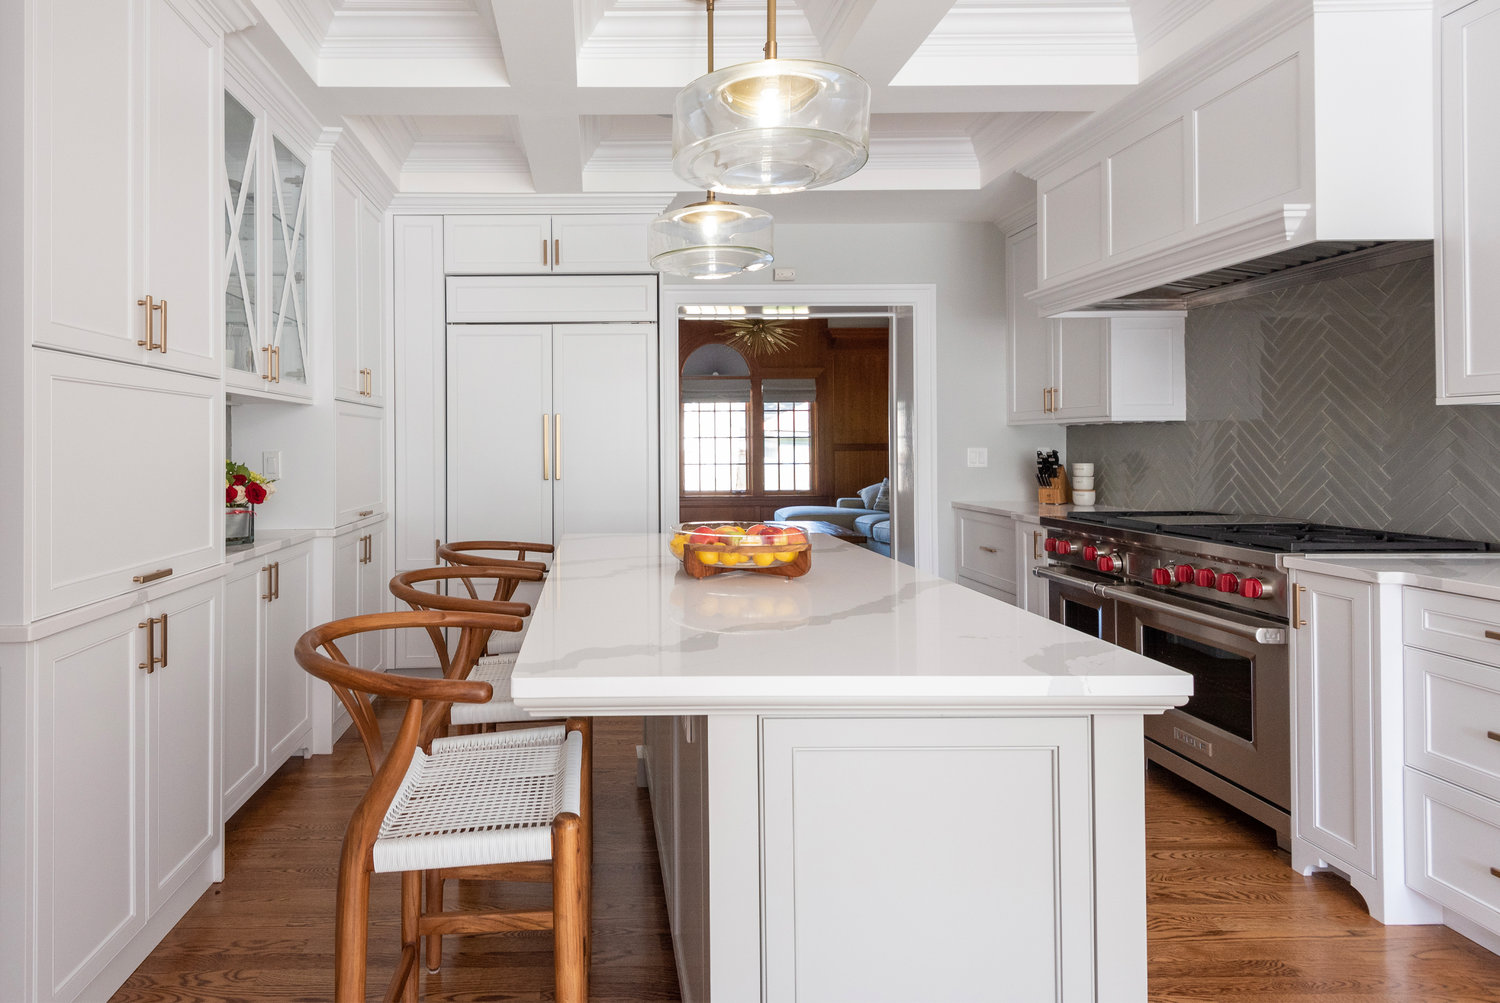 Metallic hardware shakes up traditional white cabinetry